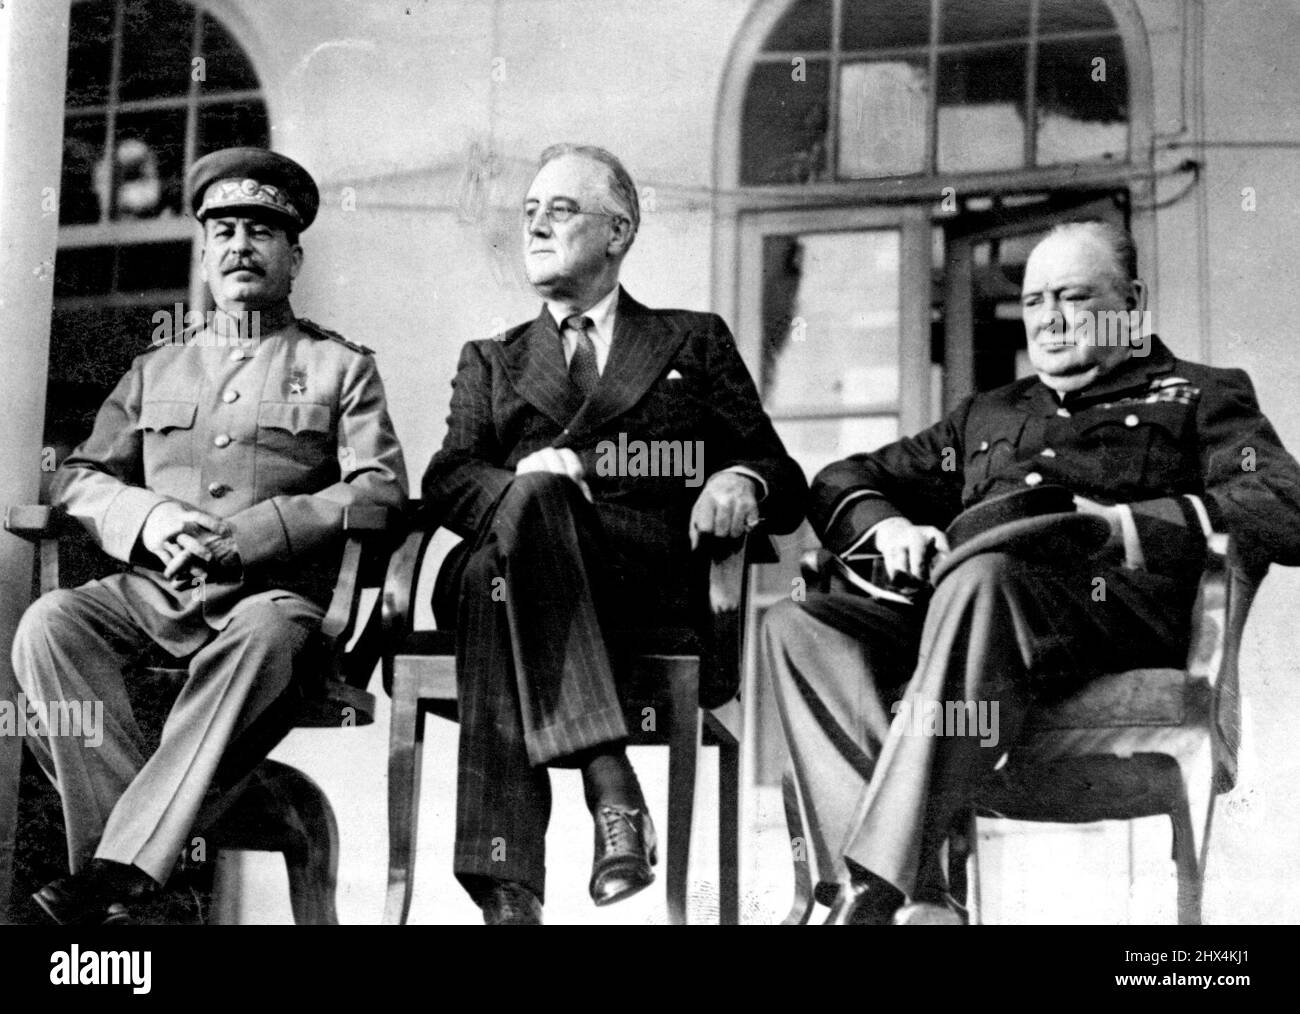 Allied Leaders Confer In Teheran -- Marshal Josef Stalin, President Franklin D. Roosevelt and Prime Minister Winston Churchill are shown on the port 100 of the Russian Embassy, at Teheran, following their historic conferences. His tunic while Prime Minister Churchill is in the uniform of a RAF Air Marshall. May 12, 1943. (Photo by ACME). Stock Photo